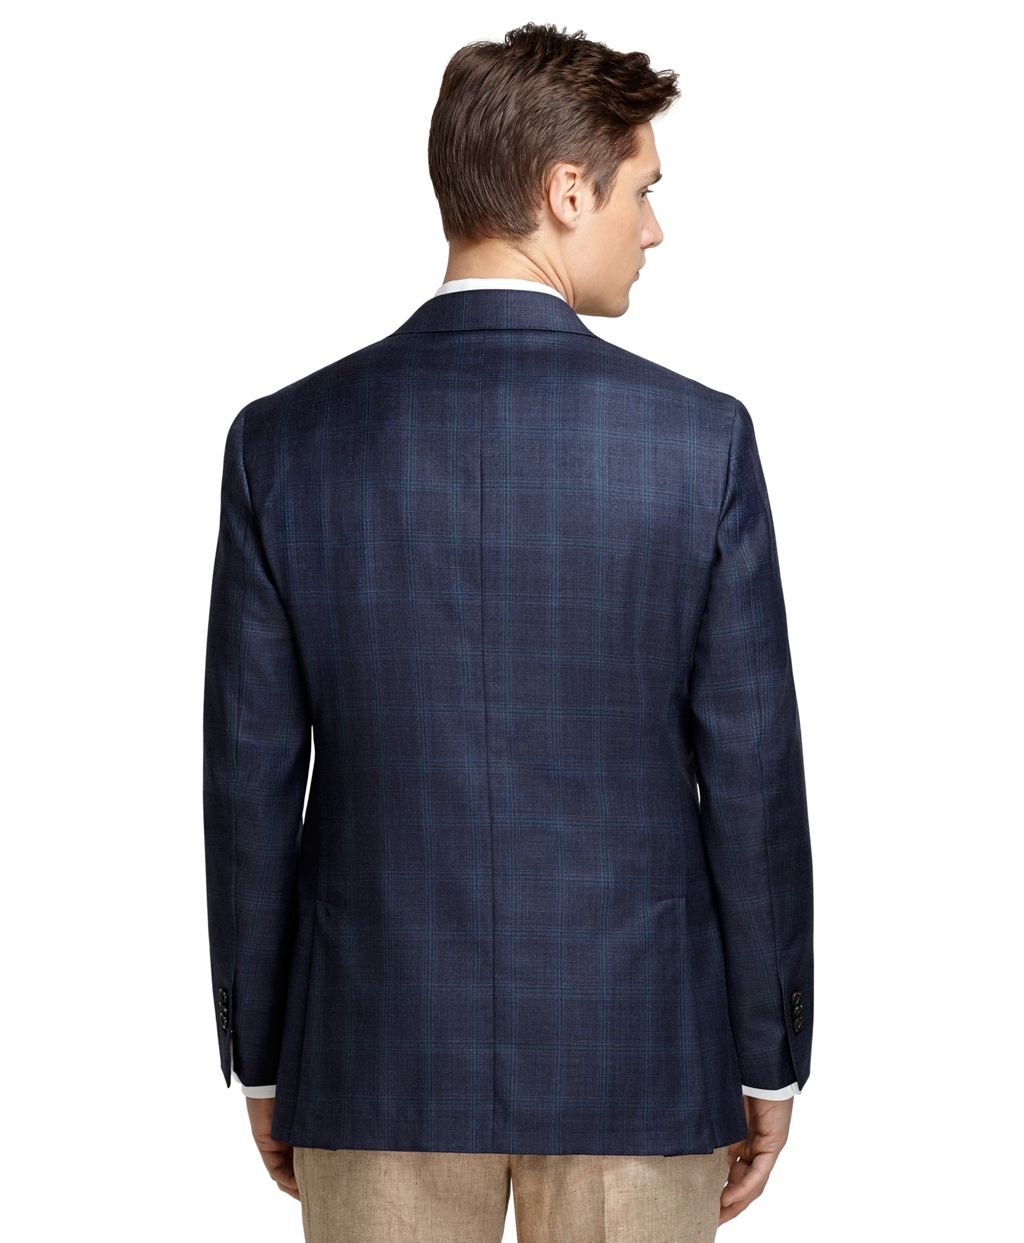 Brooks brothers Regent Fit Navy Plaid With Teal Windowpane Sport ...